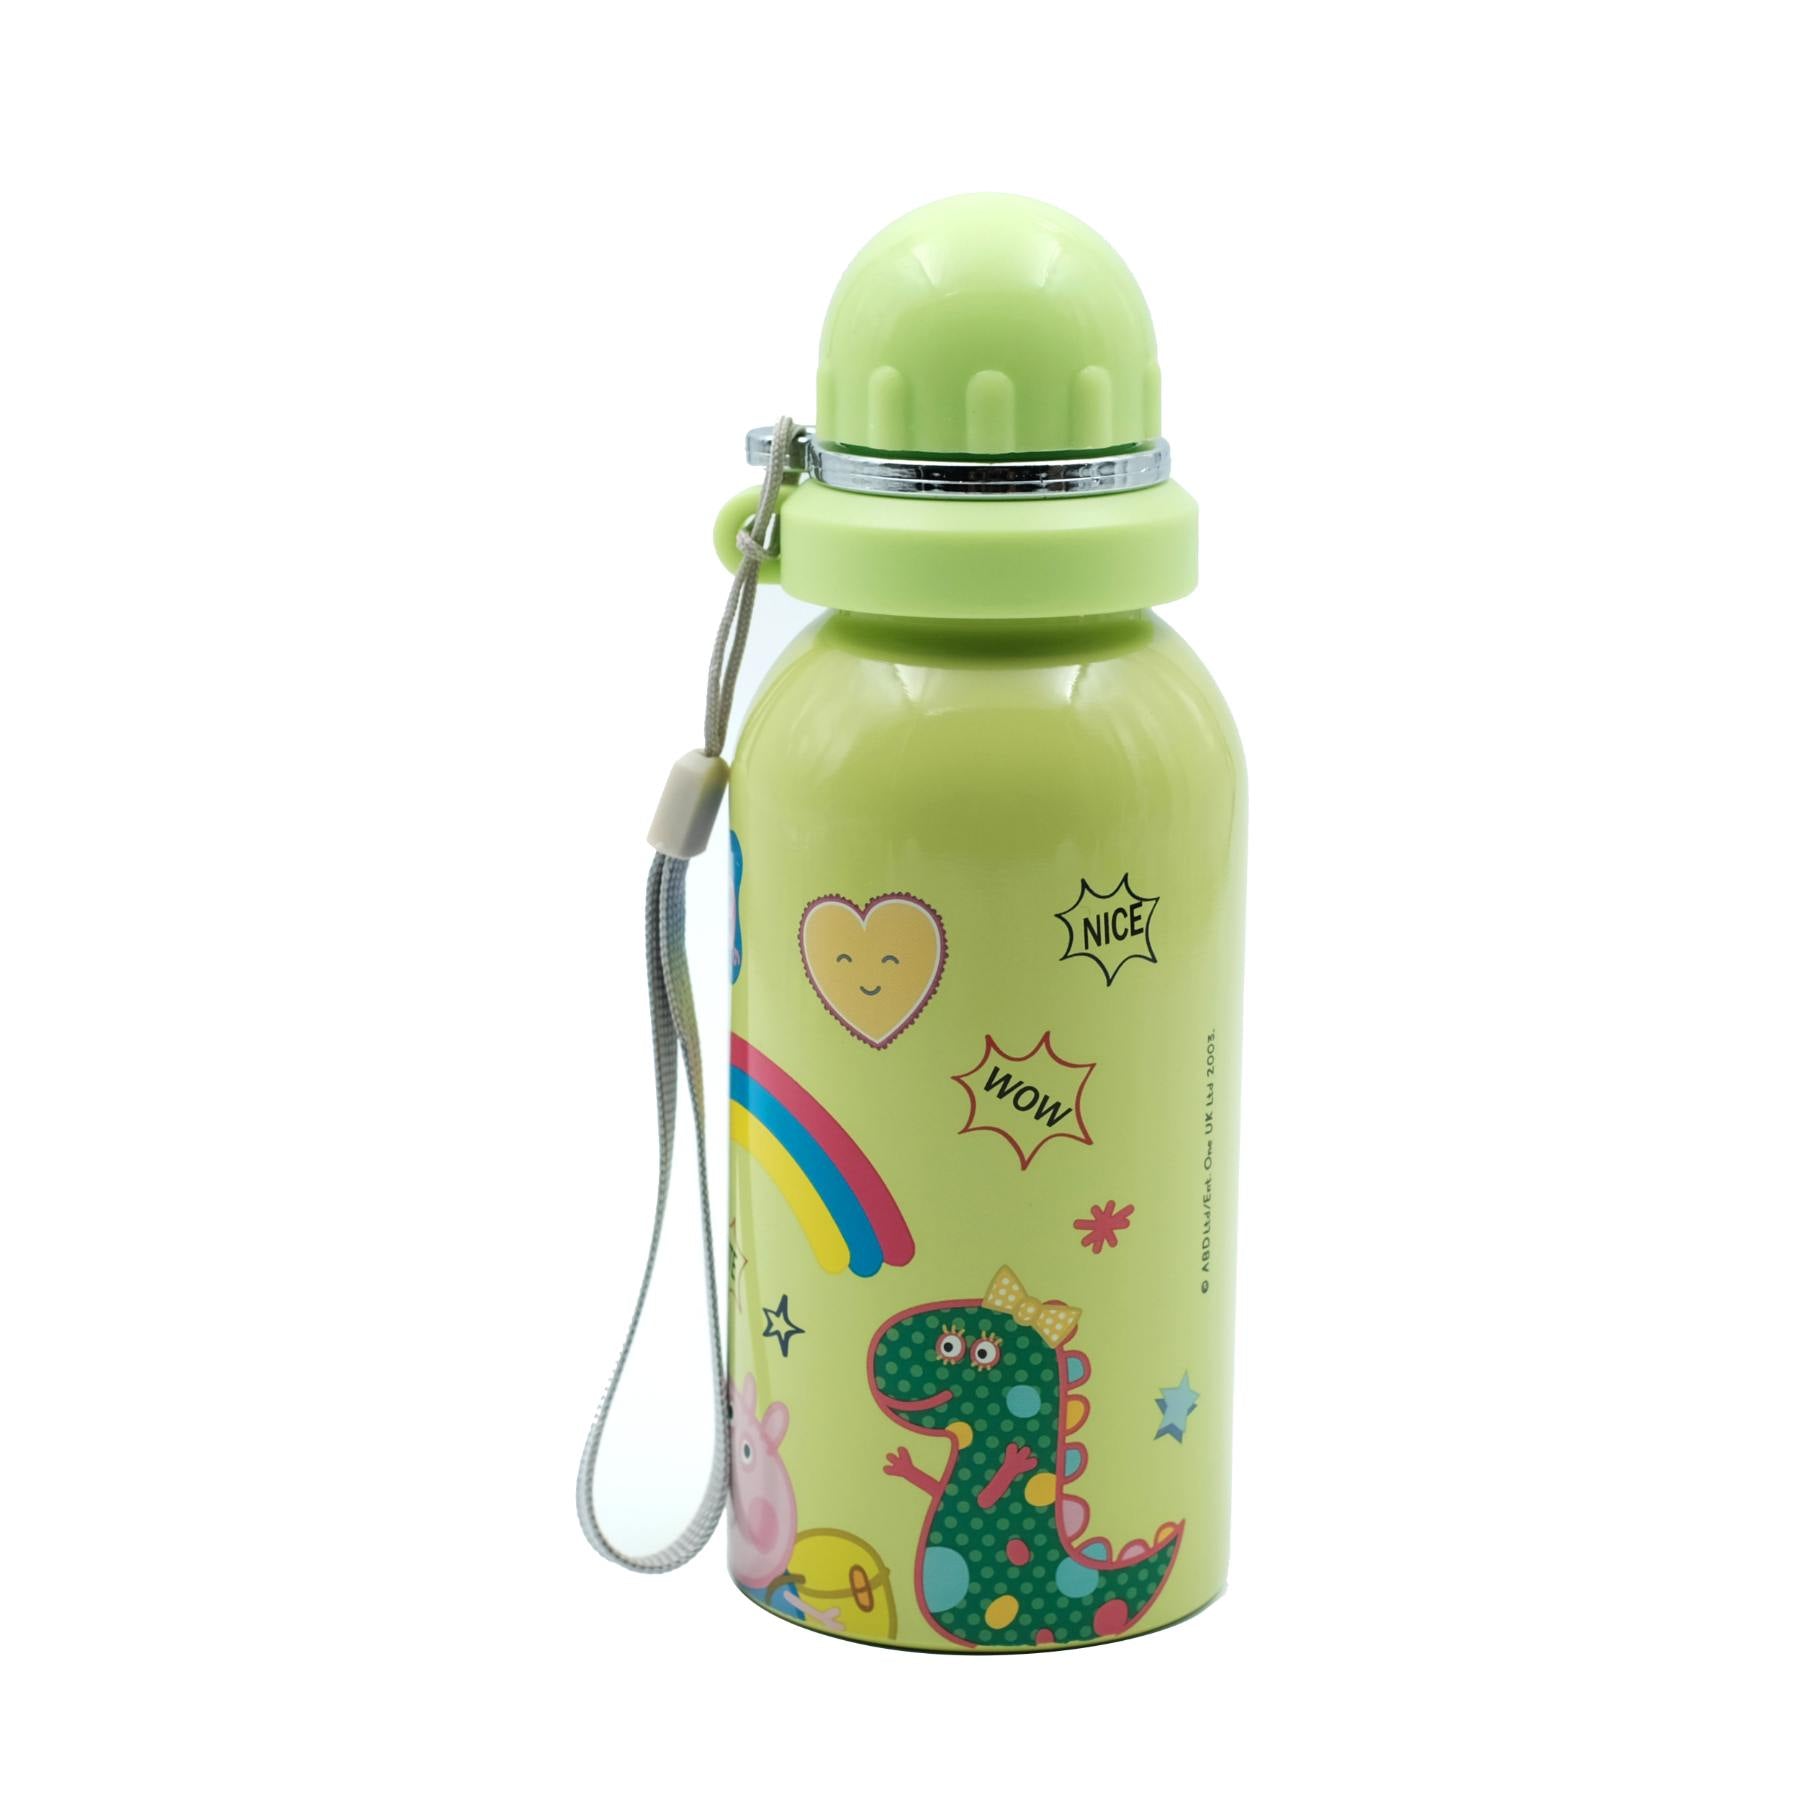 Youp Stainless Steel Green Color Peppa Pig Kids Water Bottle HYBRID - 500 Ml